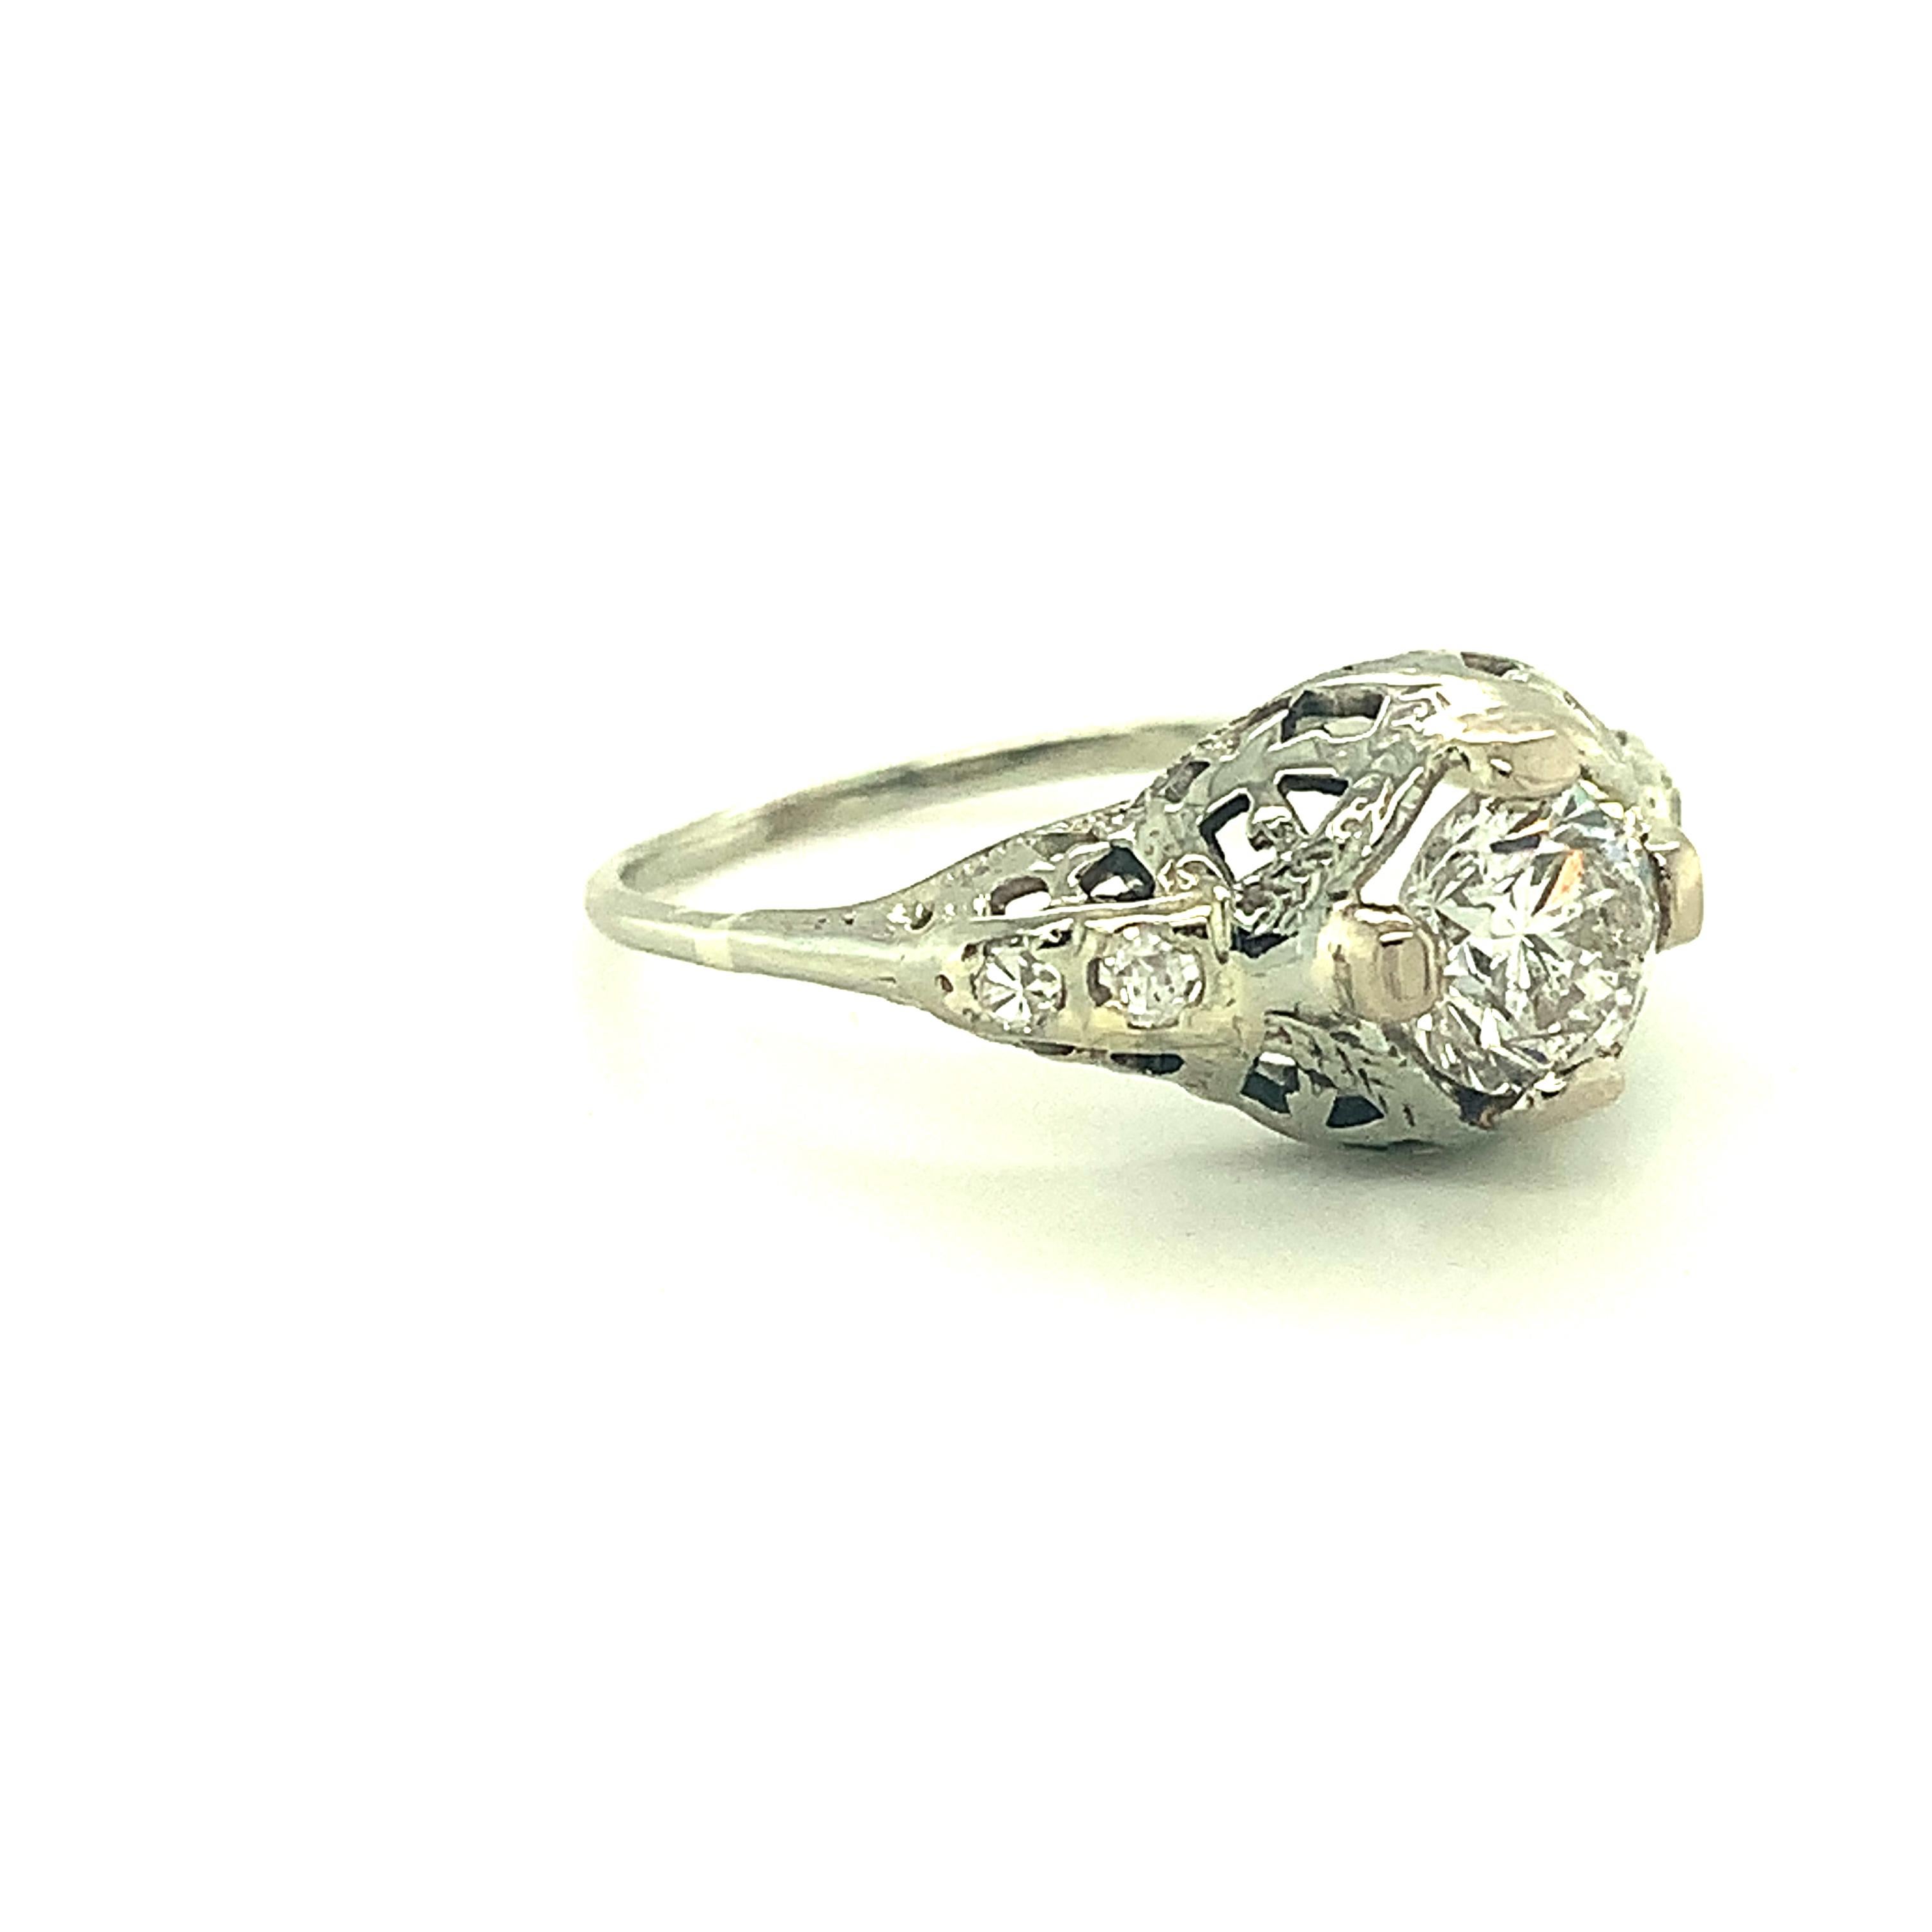 Art Deco 14K white gold filigree ring featuring a round brilliant cut diamond weighing .78cts. The diamond measures  5.7mm. It has G-H color and I-1 clarity.  Beautifully pierced and engraved setting with 4 new prongs. There are 4 small round accent